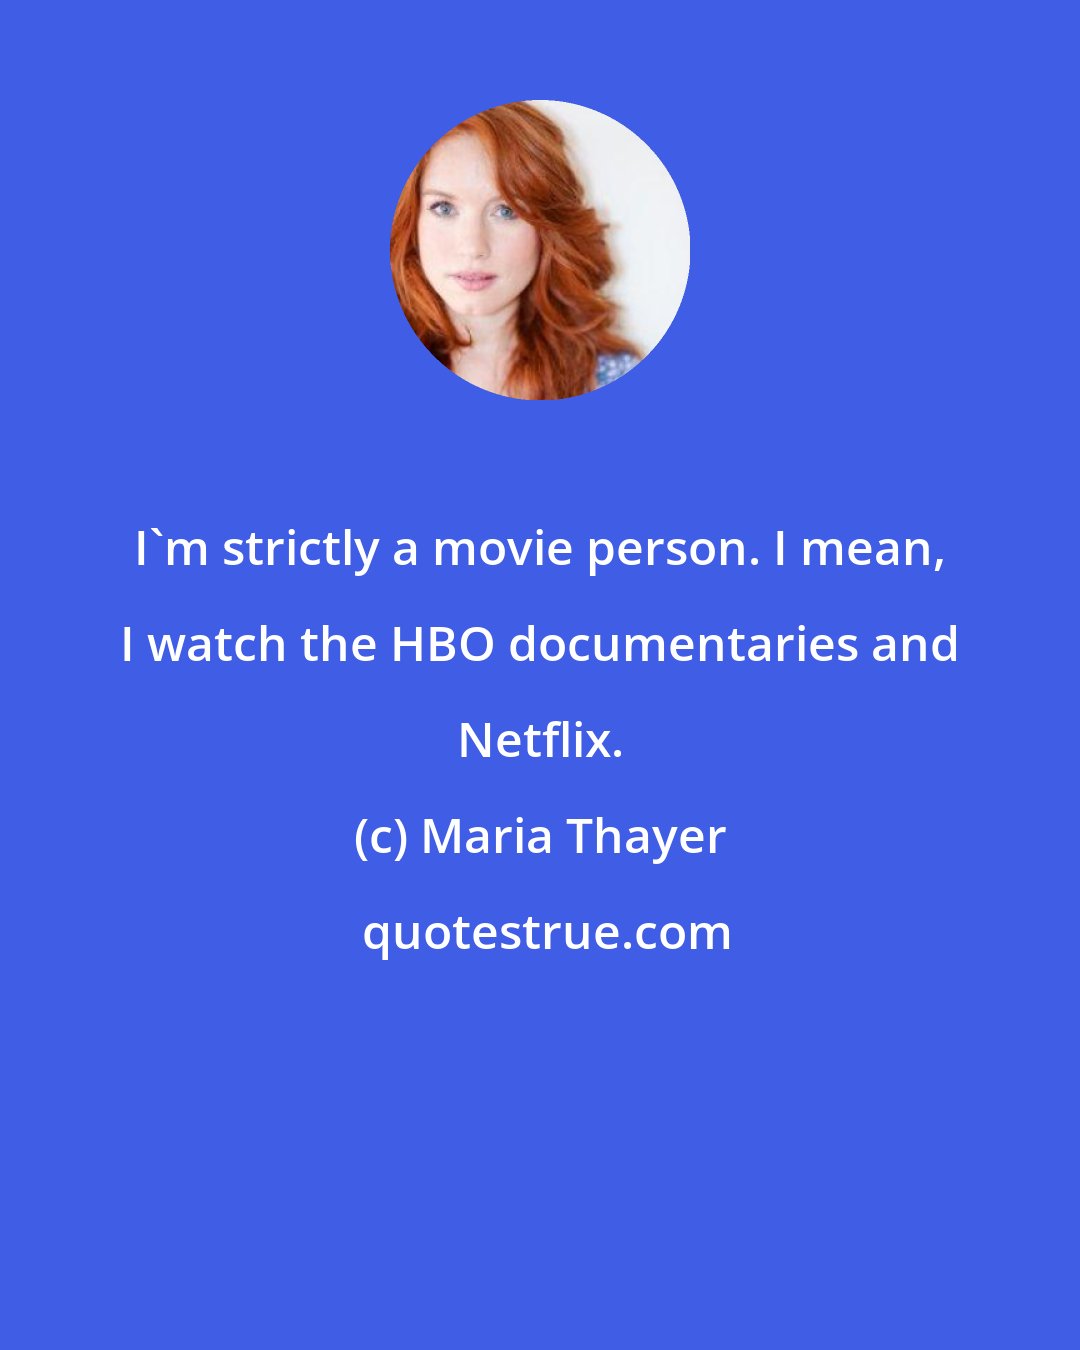 Maria Thayer: I'm strictly a movie person. I mean, I watch the HBO documentaries and Netflix.